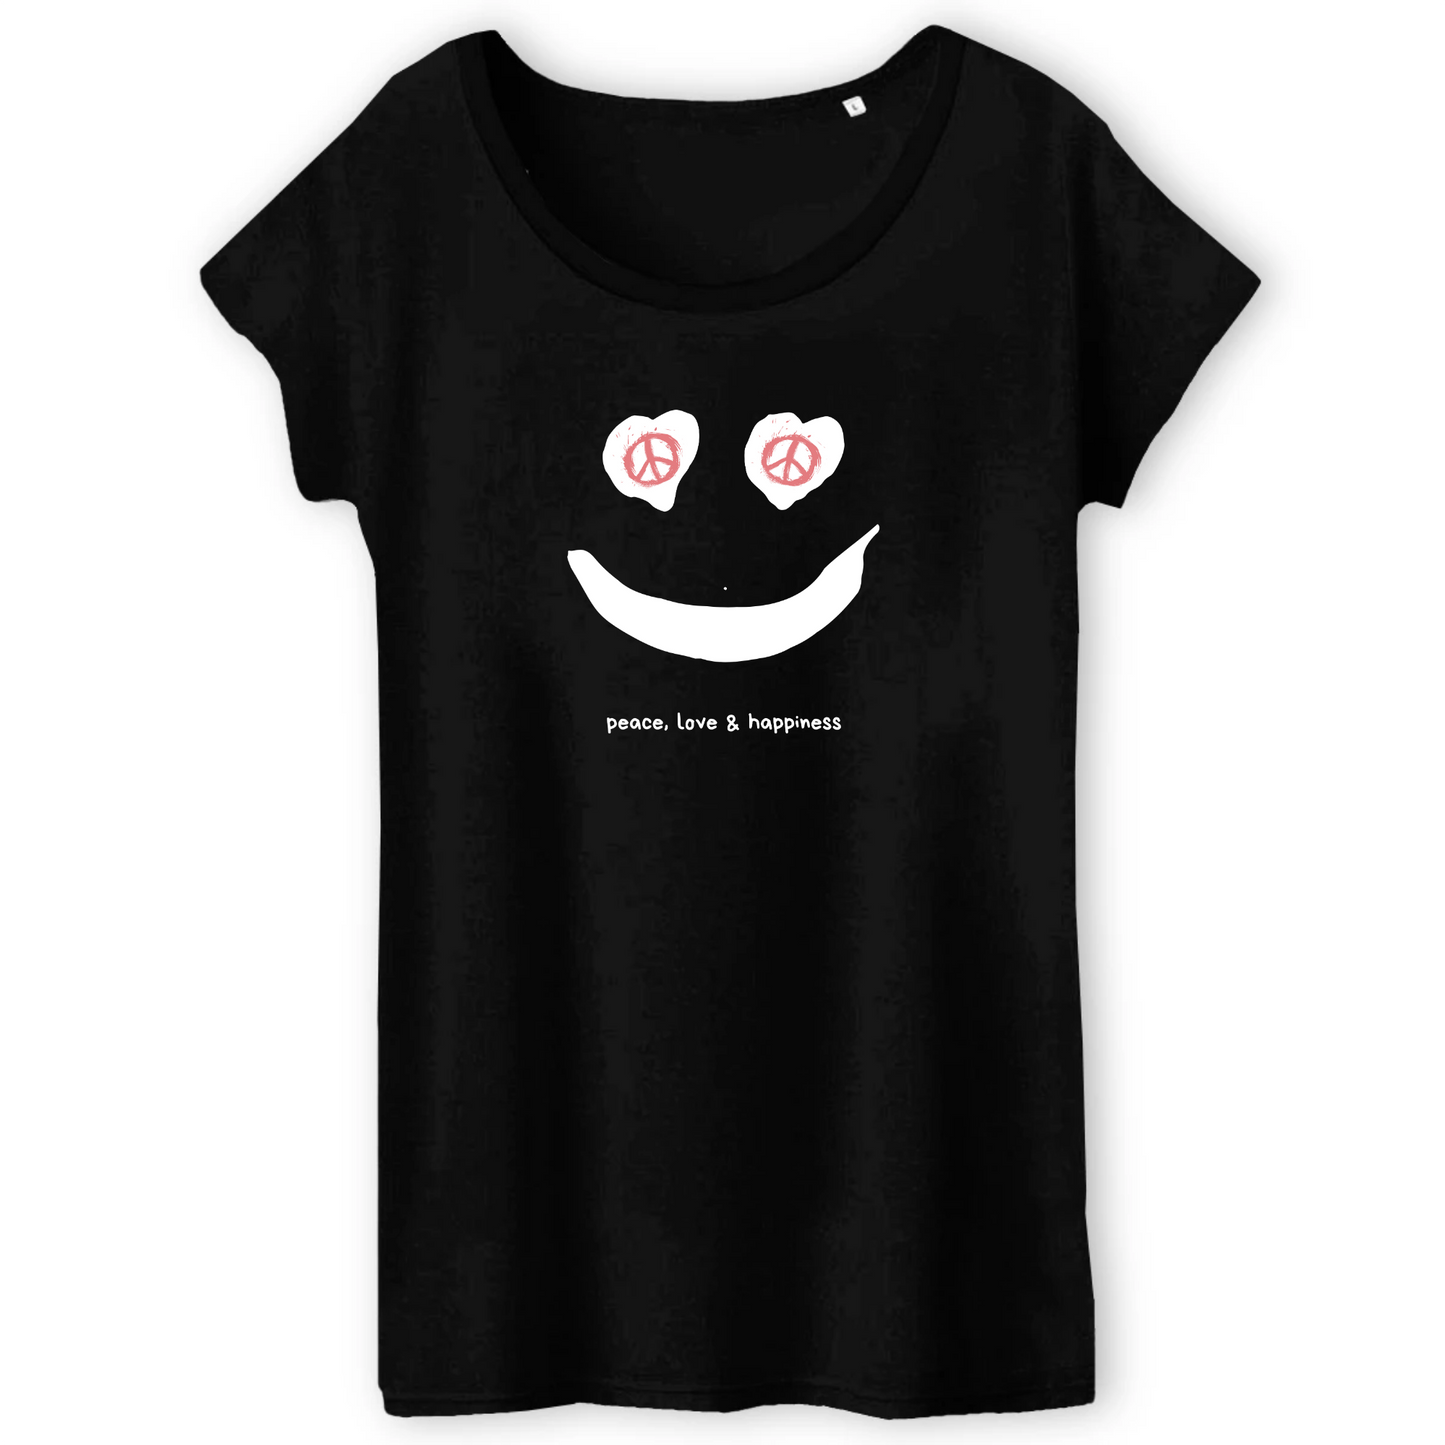 Peace Love & HappyFace T-Shirt from T-Pop available from Moon Behind The Hill's Custom Made Apparel range